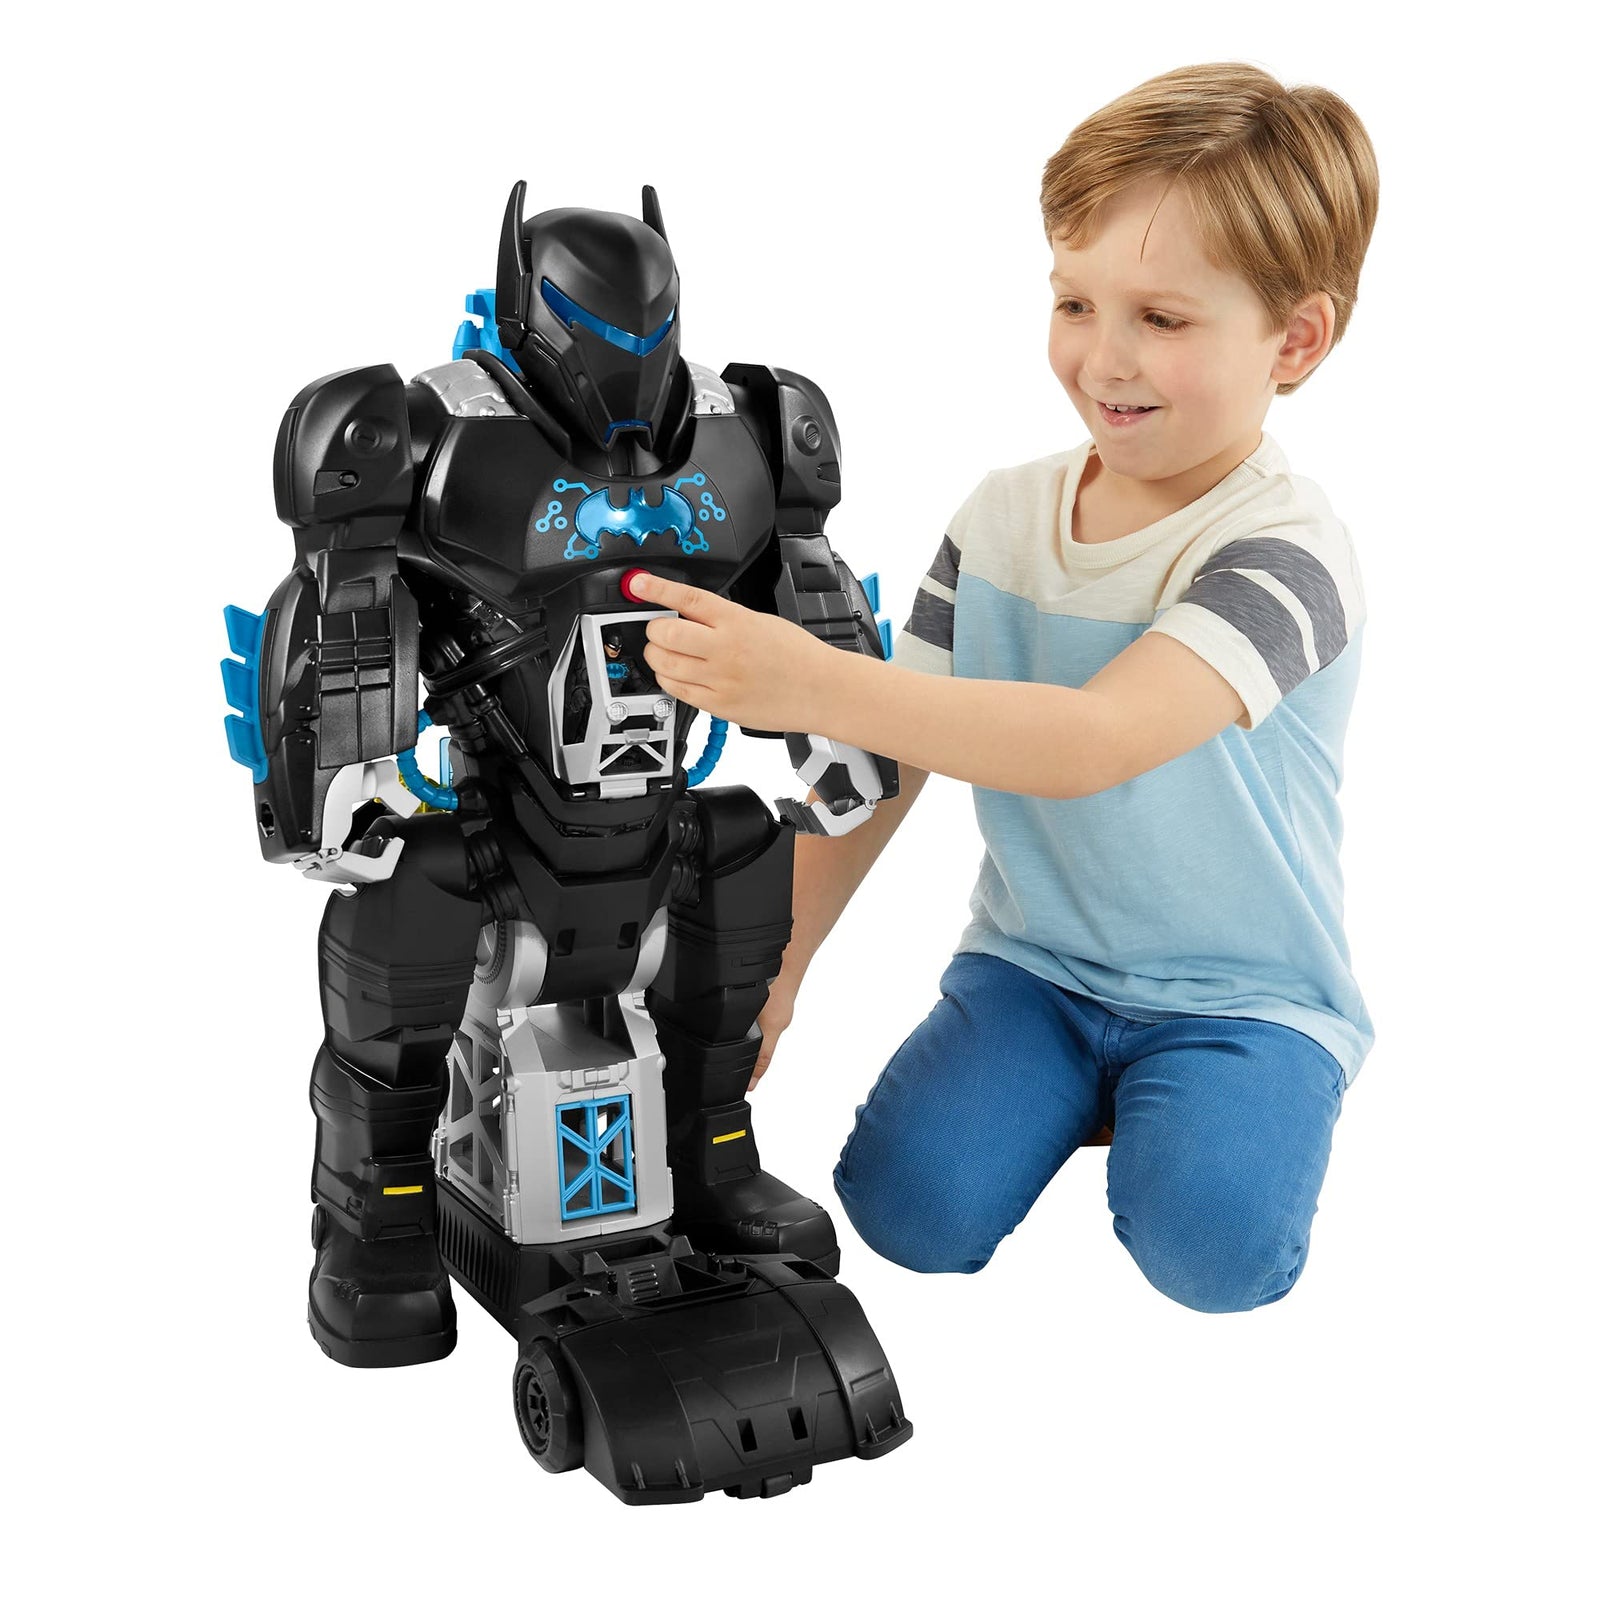 Fisher-Price Imaginext DC Super Friends Bat-Tech Batbot, Transforming 2-in-1 Batman Robot and Playset with Lights and Sounds for Kids Ages 3-8